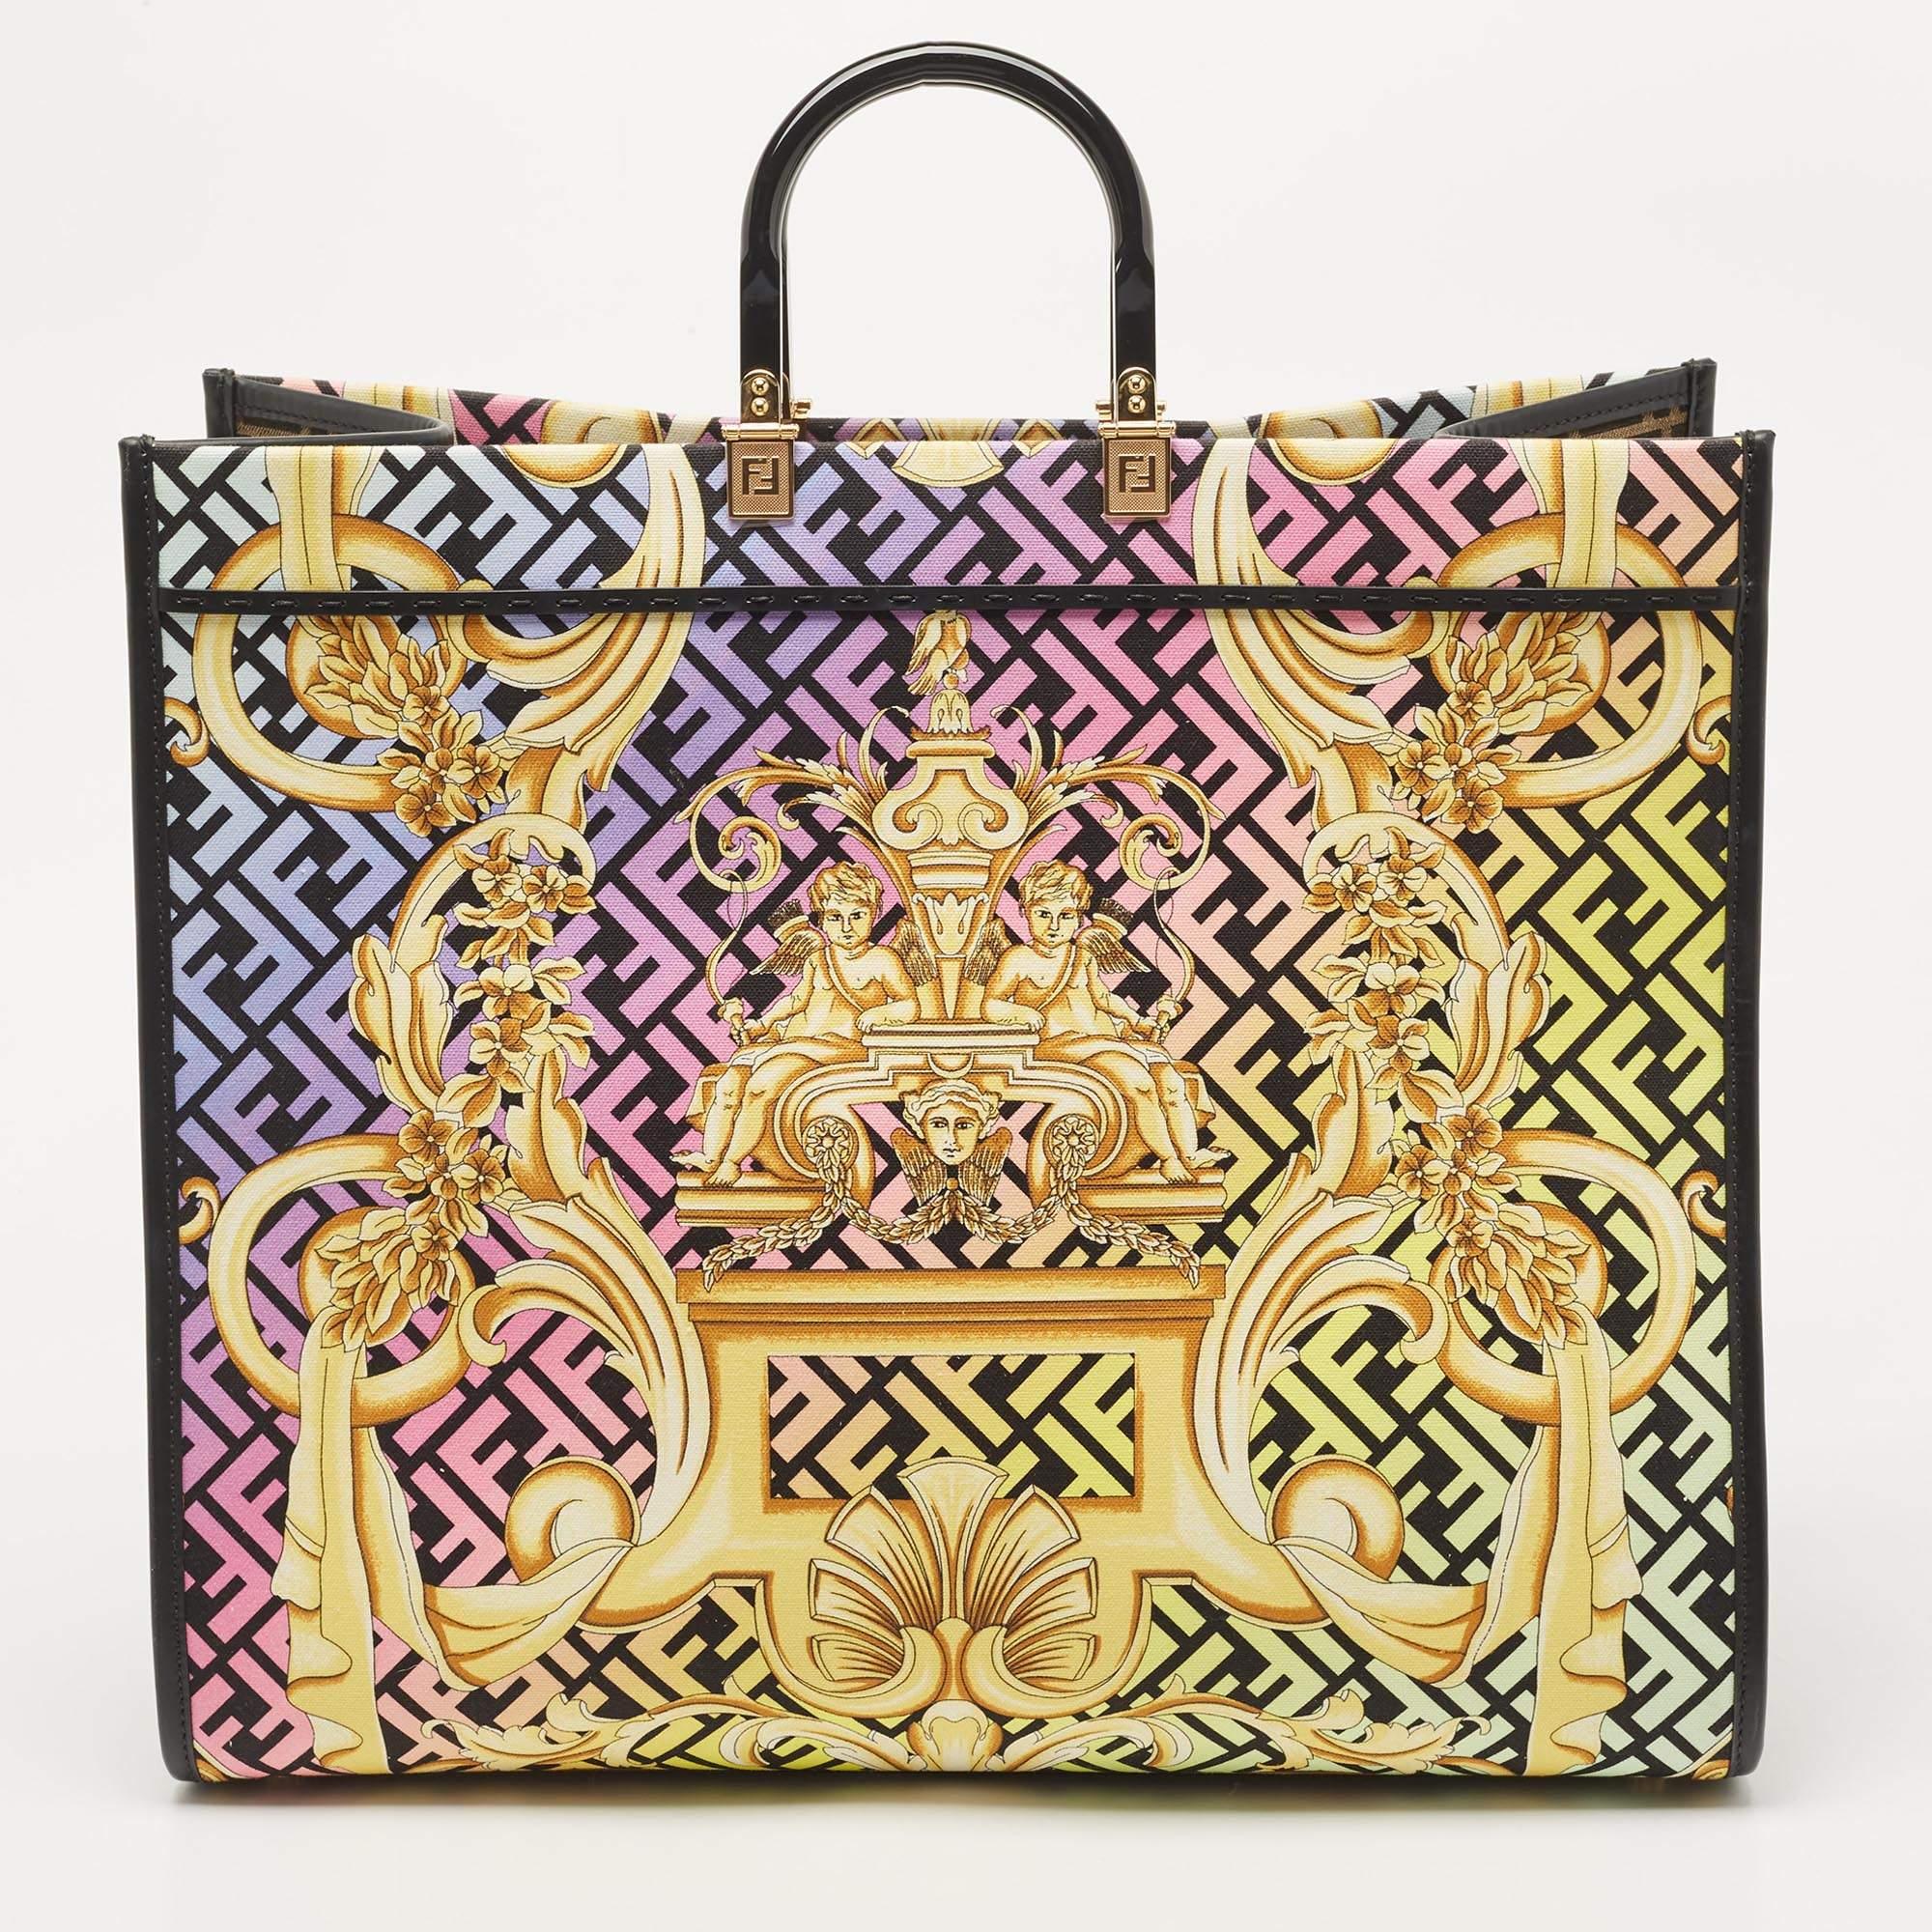 The Fendi x Versace Fendace Sunshine Tote is a stunning and vibrant accessory that showcases the fusion of two iconic fashion houses. This spacious tote features a lively baroque print on durable canvas, accented with luxurious leather details,